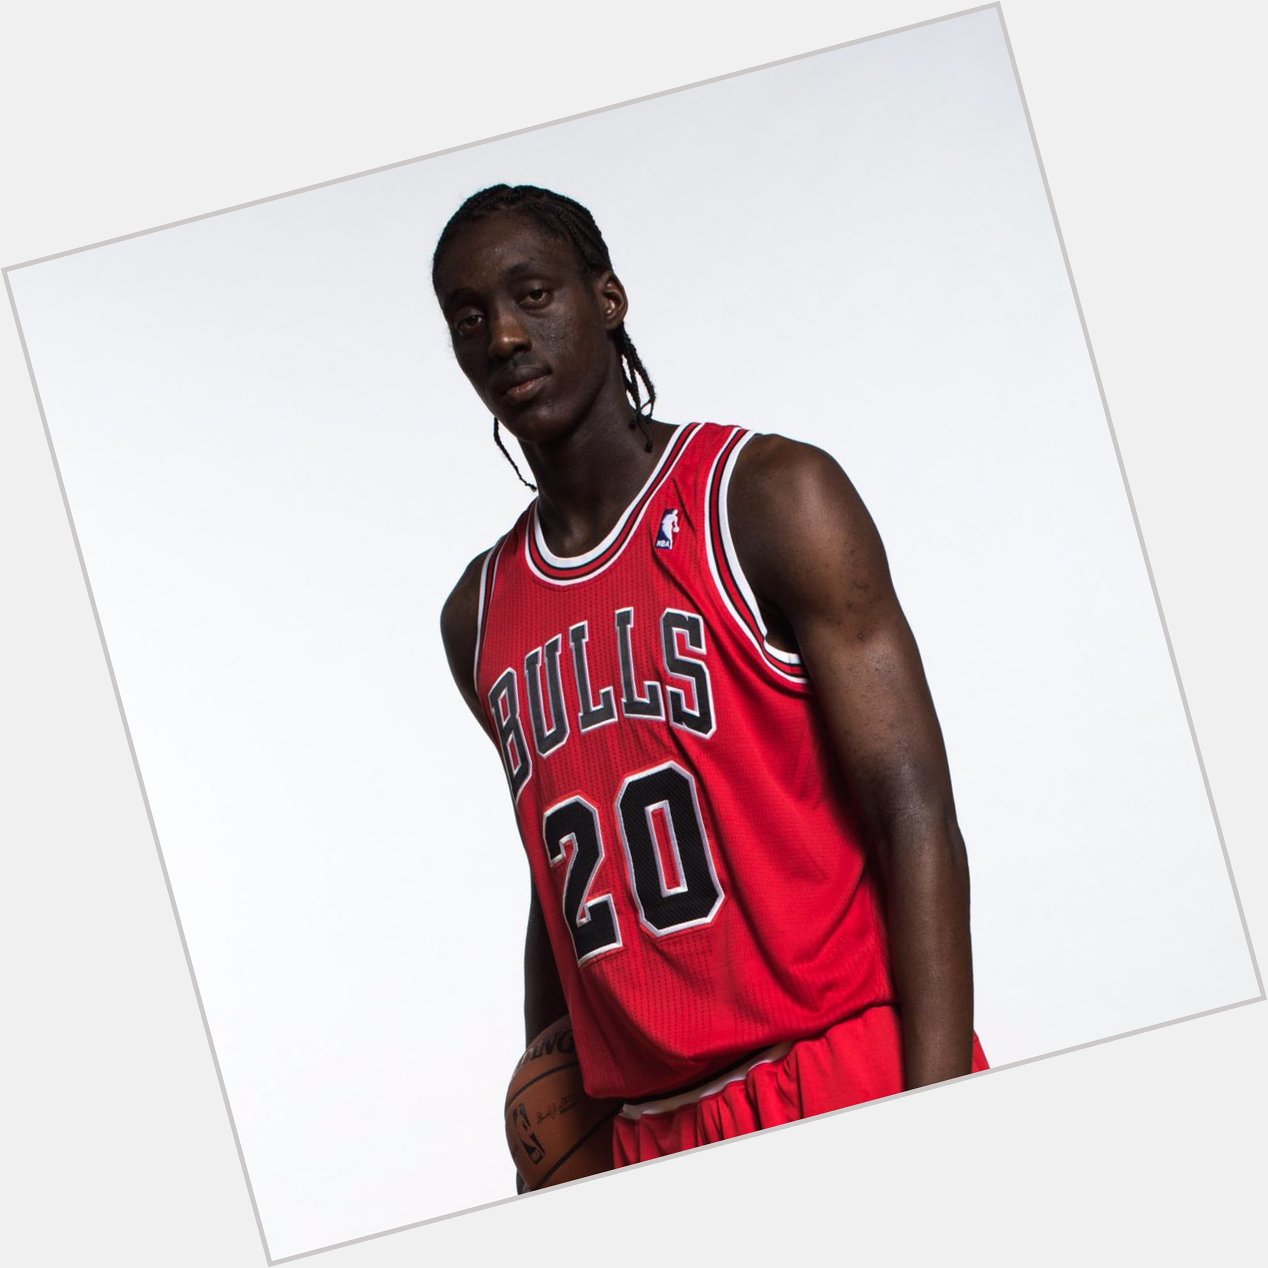 Just wanna say happy bday to my Nigga tony snell. In case y\all don\t know what he look like here u go. 